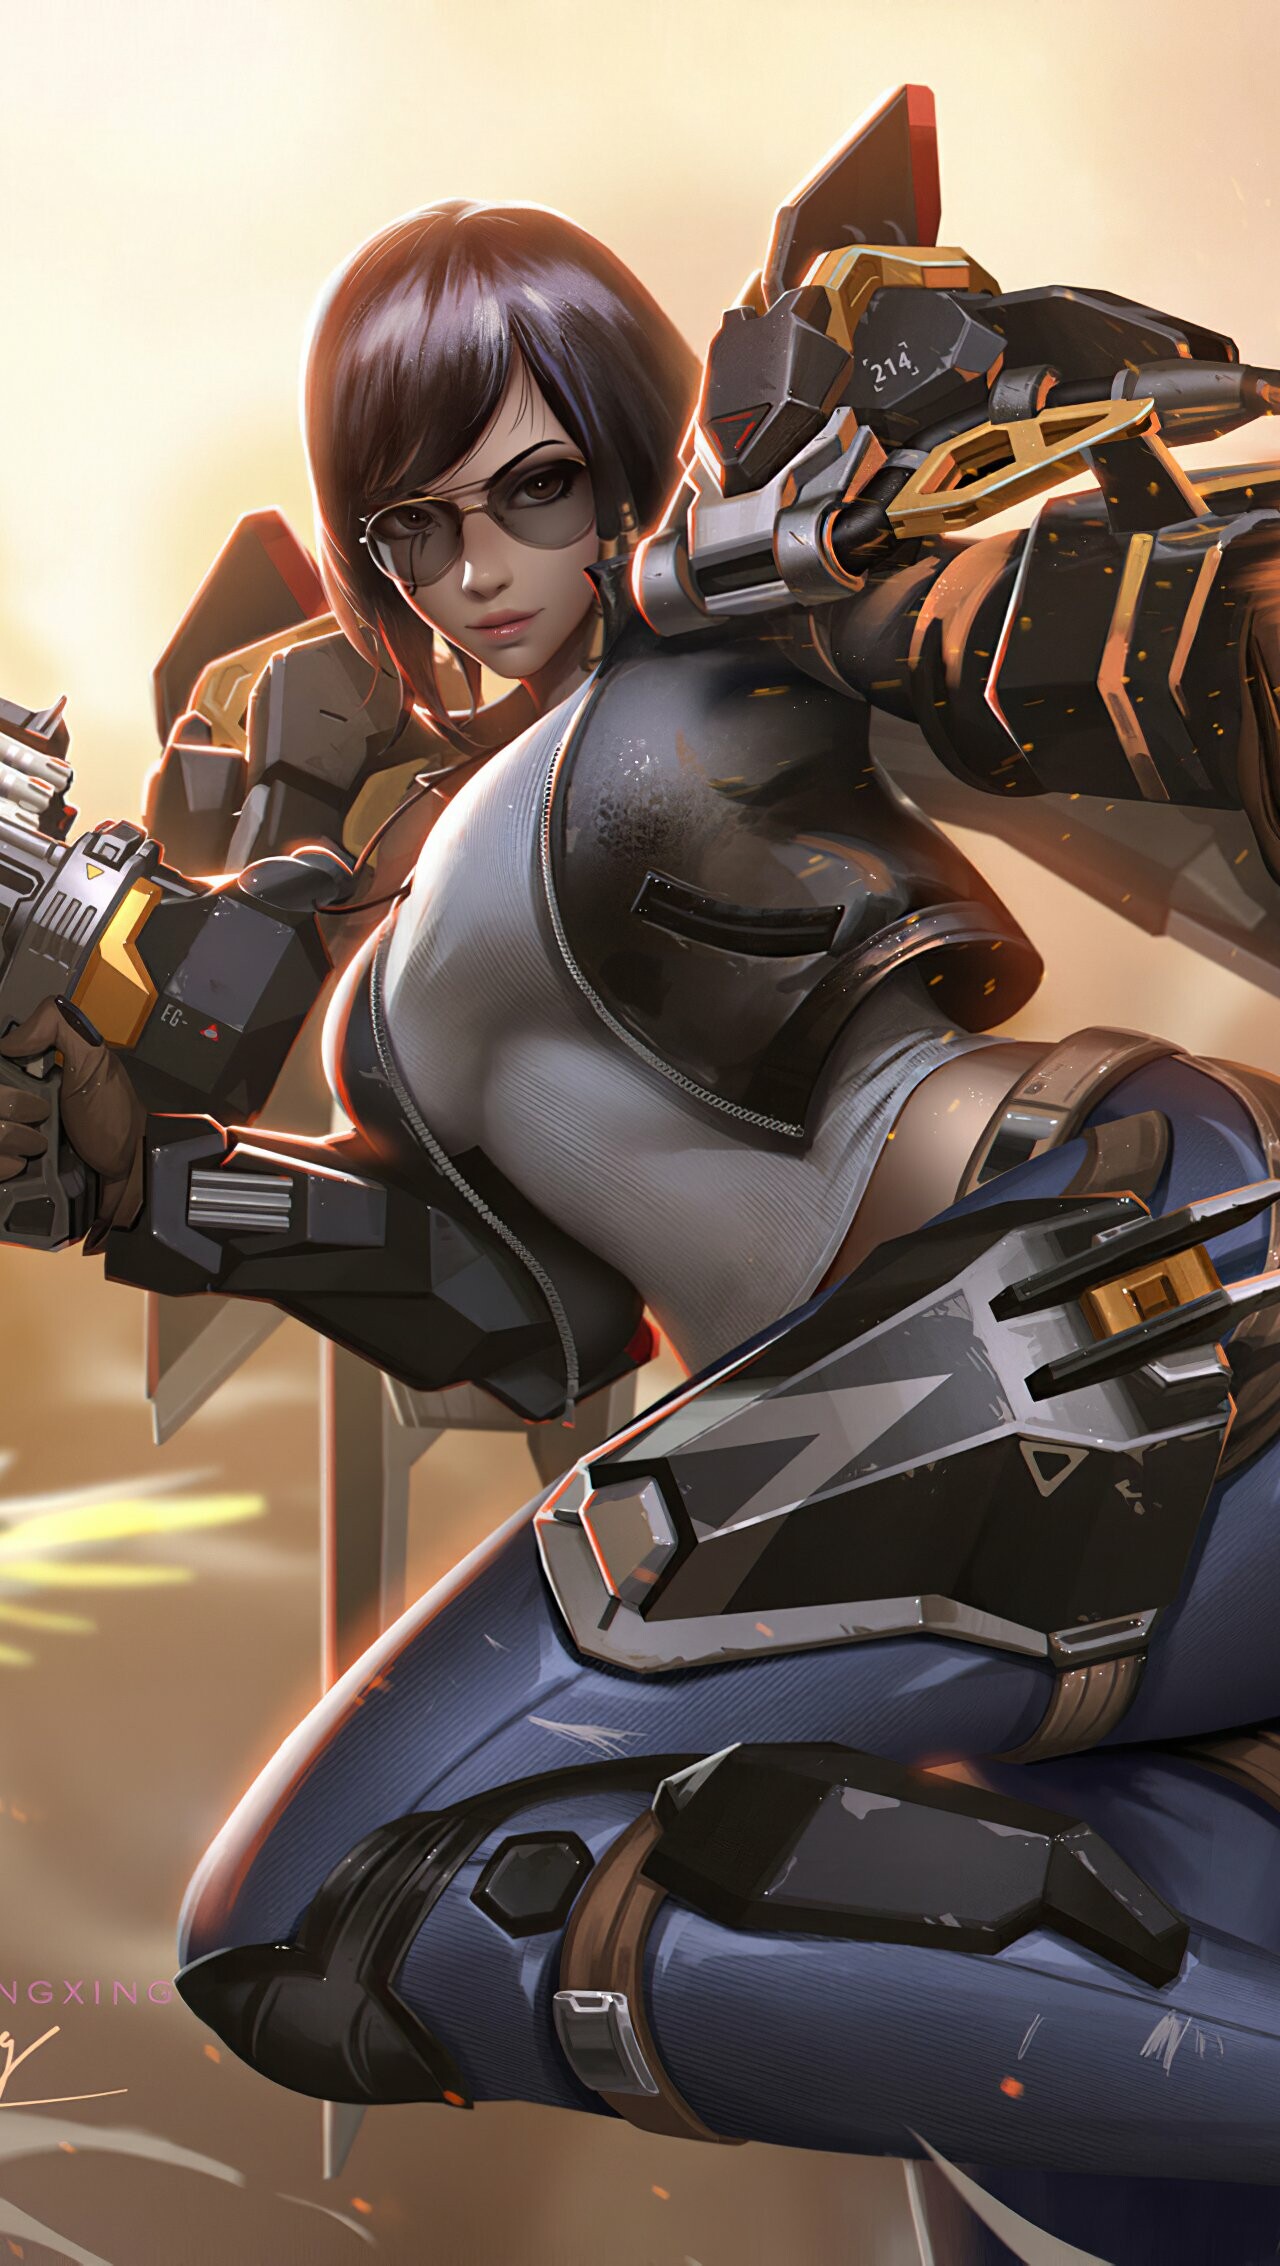 Overwatch: Pharah, Fareeha Amari, A hero with excellent aerial mobility. 1280x2270 HD Background.